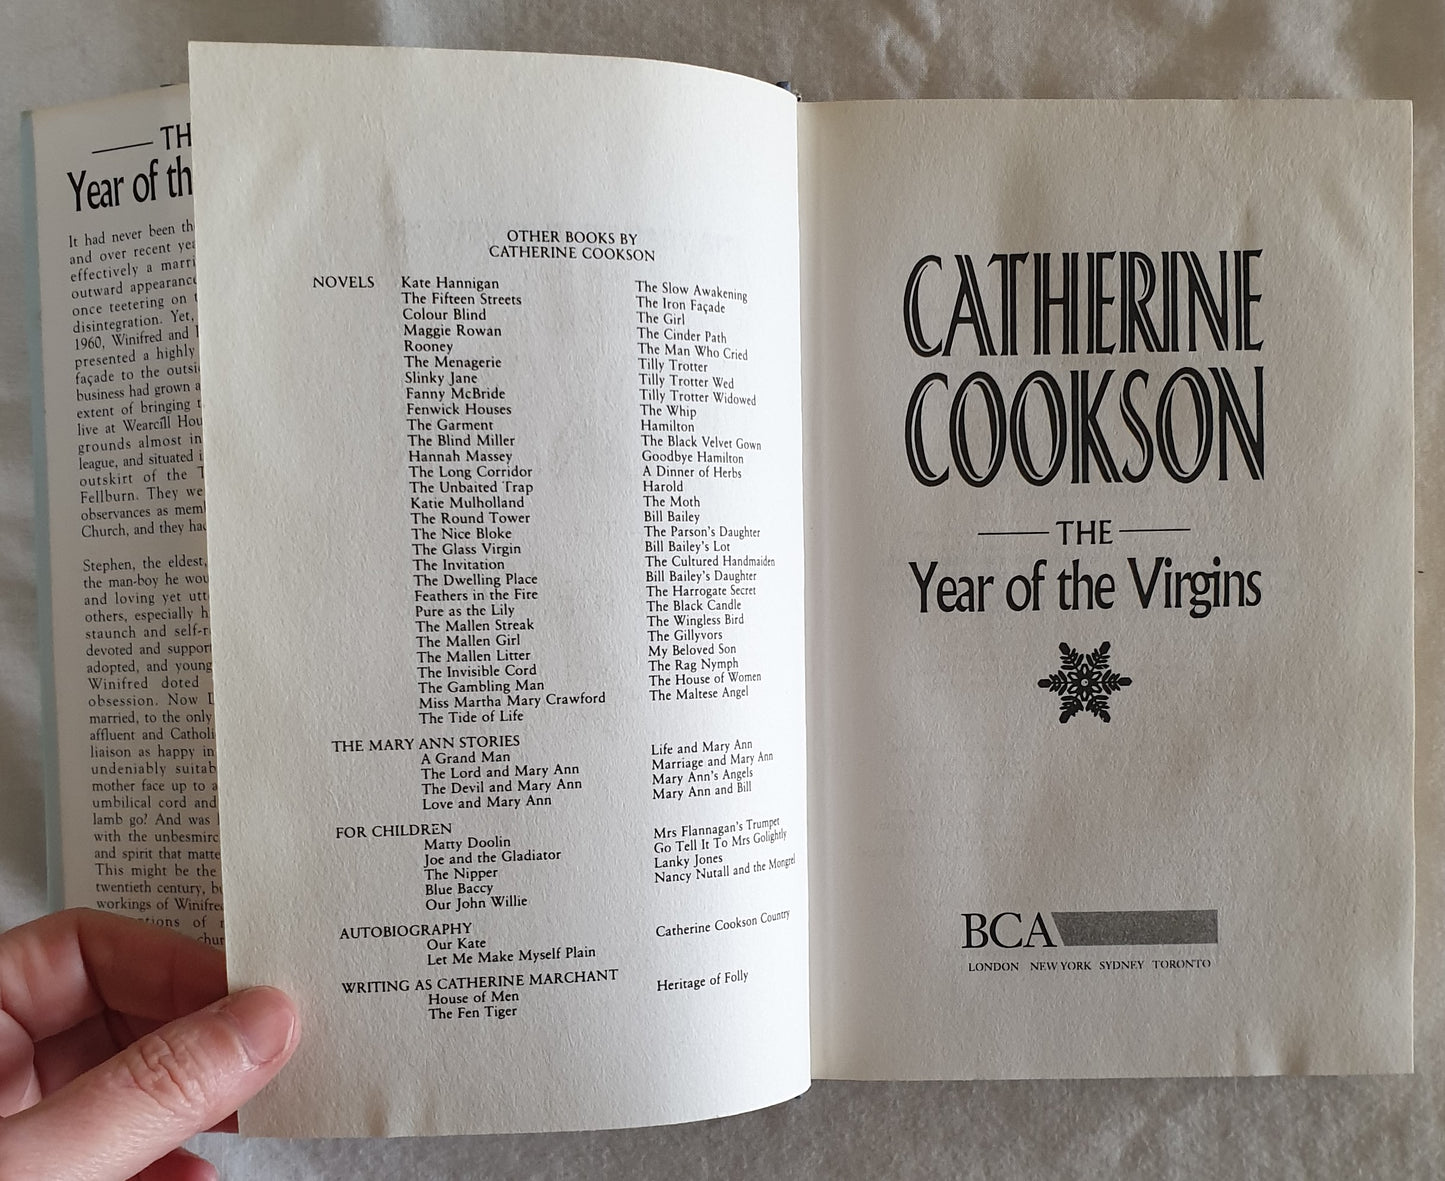 The Year of the Virgins by Catherine Cookson